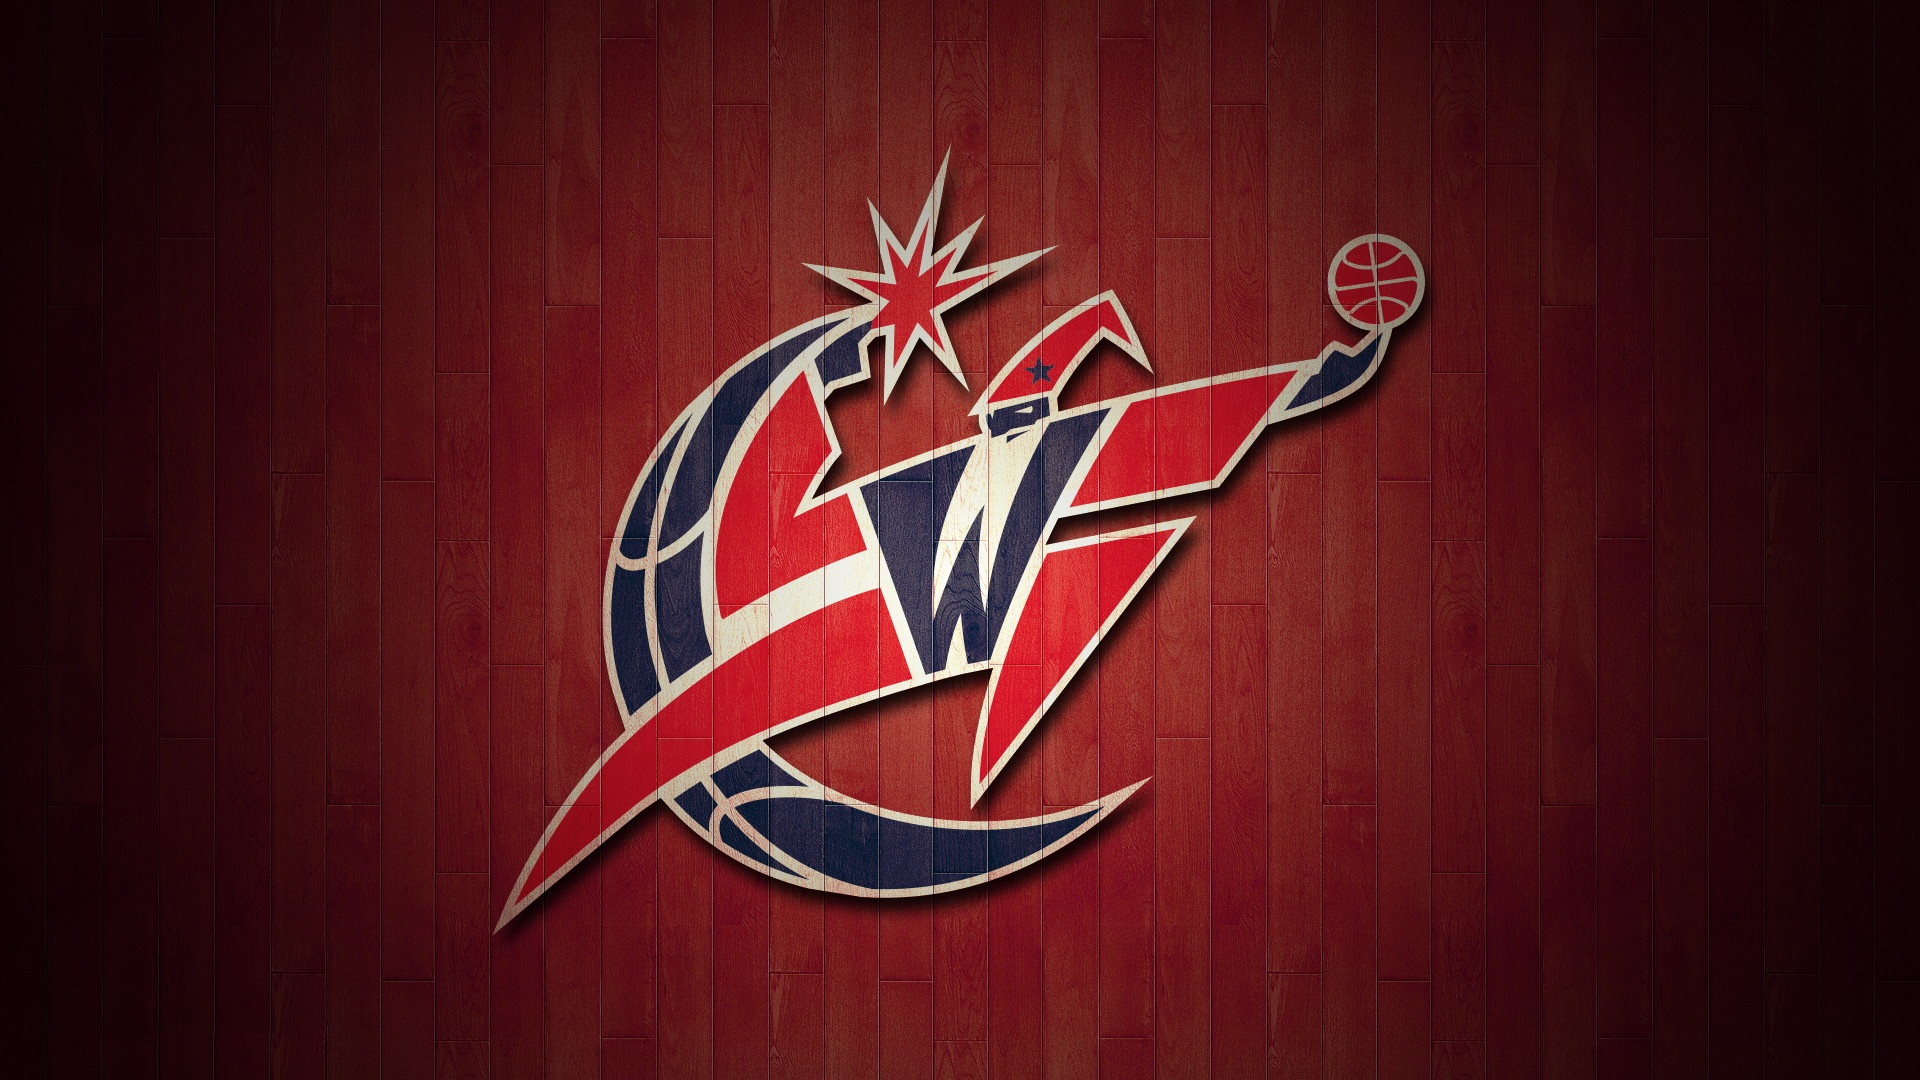 Washington Wizards Wallpaper For Mac Backgrounds with high-resolution 1920x1080 pixel. You can use this wallpaper for your Desktop Computer Backgrounds, Windows or Mac Screensavers, iPhone Lock screen, Tablet or Android and another Mobile Phone device